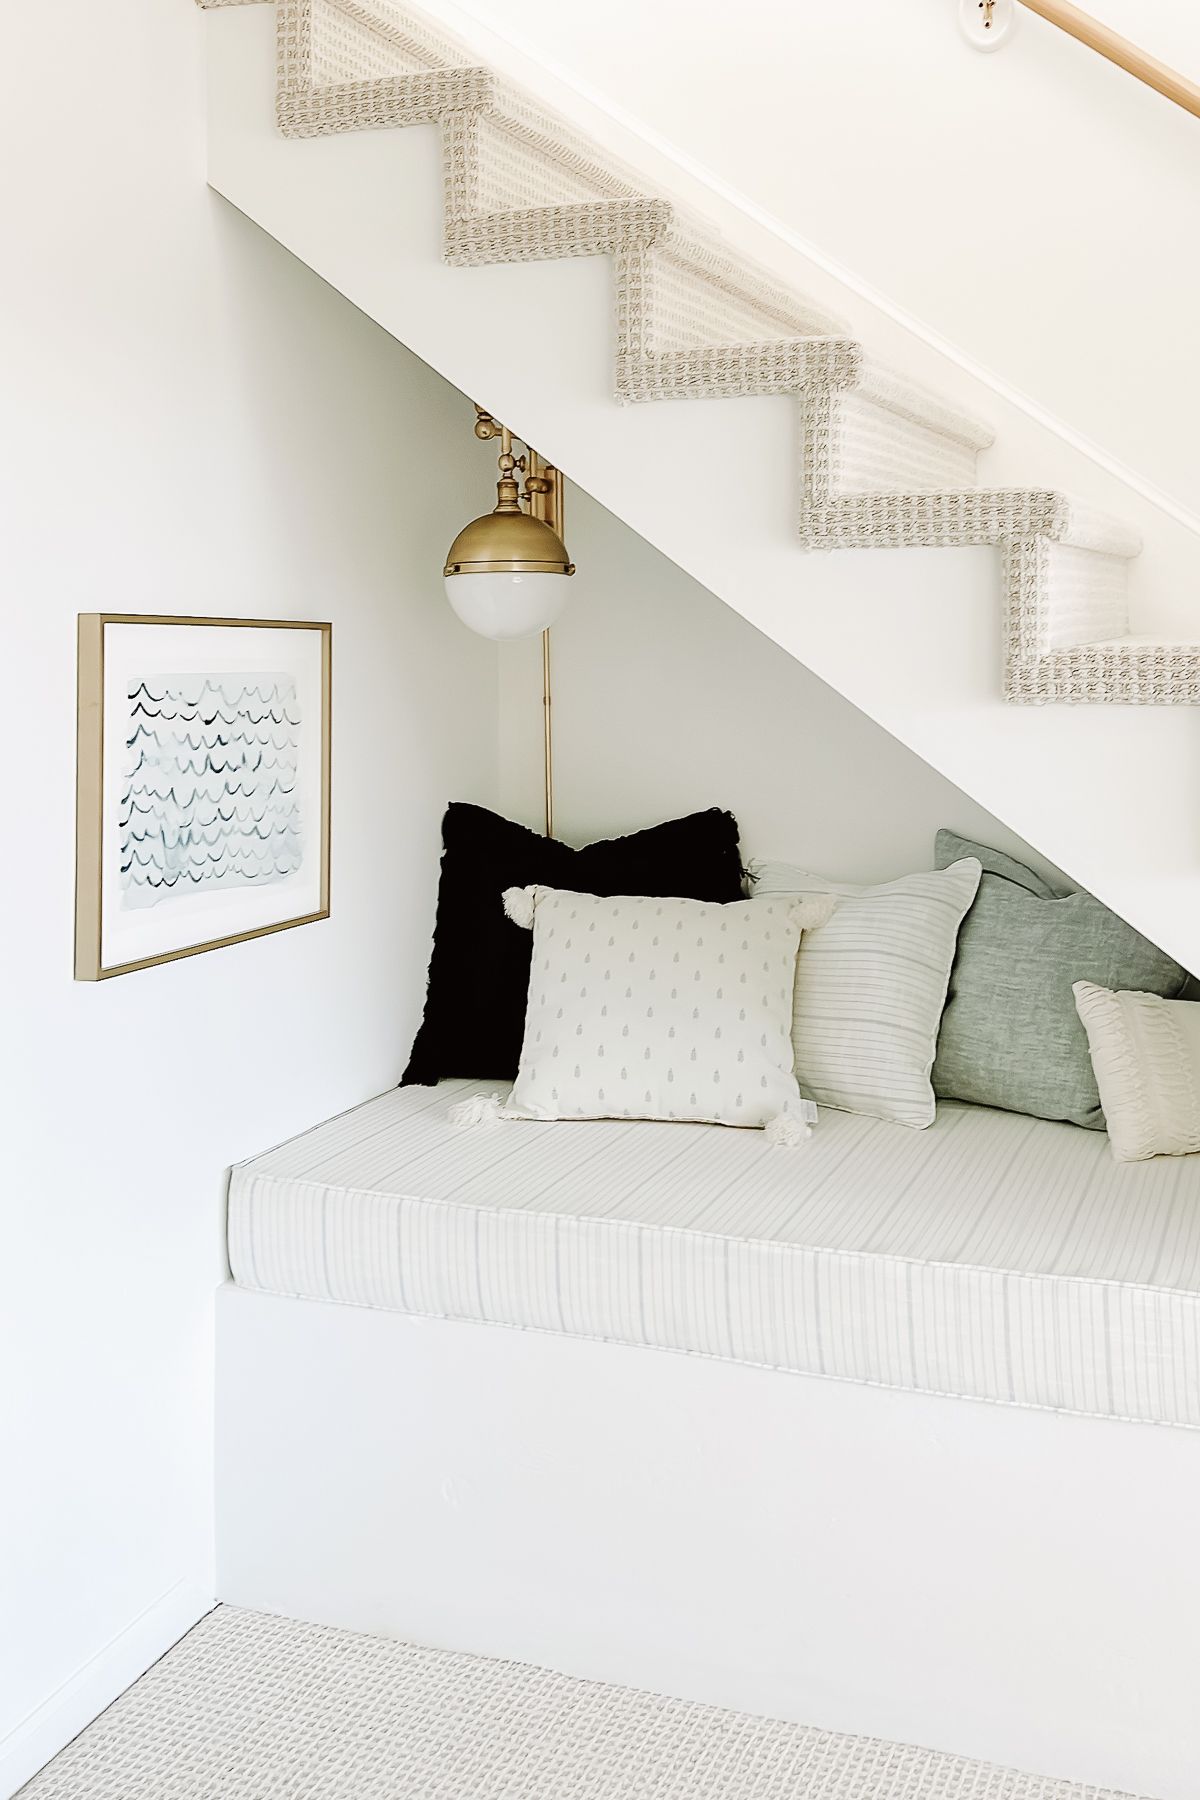 A nook under an open stair case decorated with blue and white pillow covers